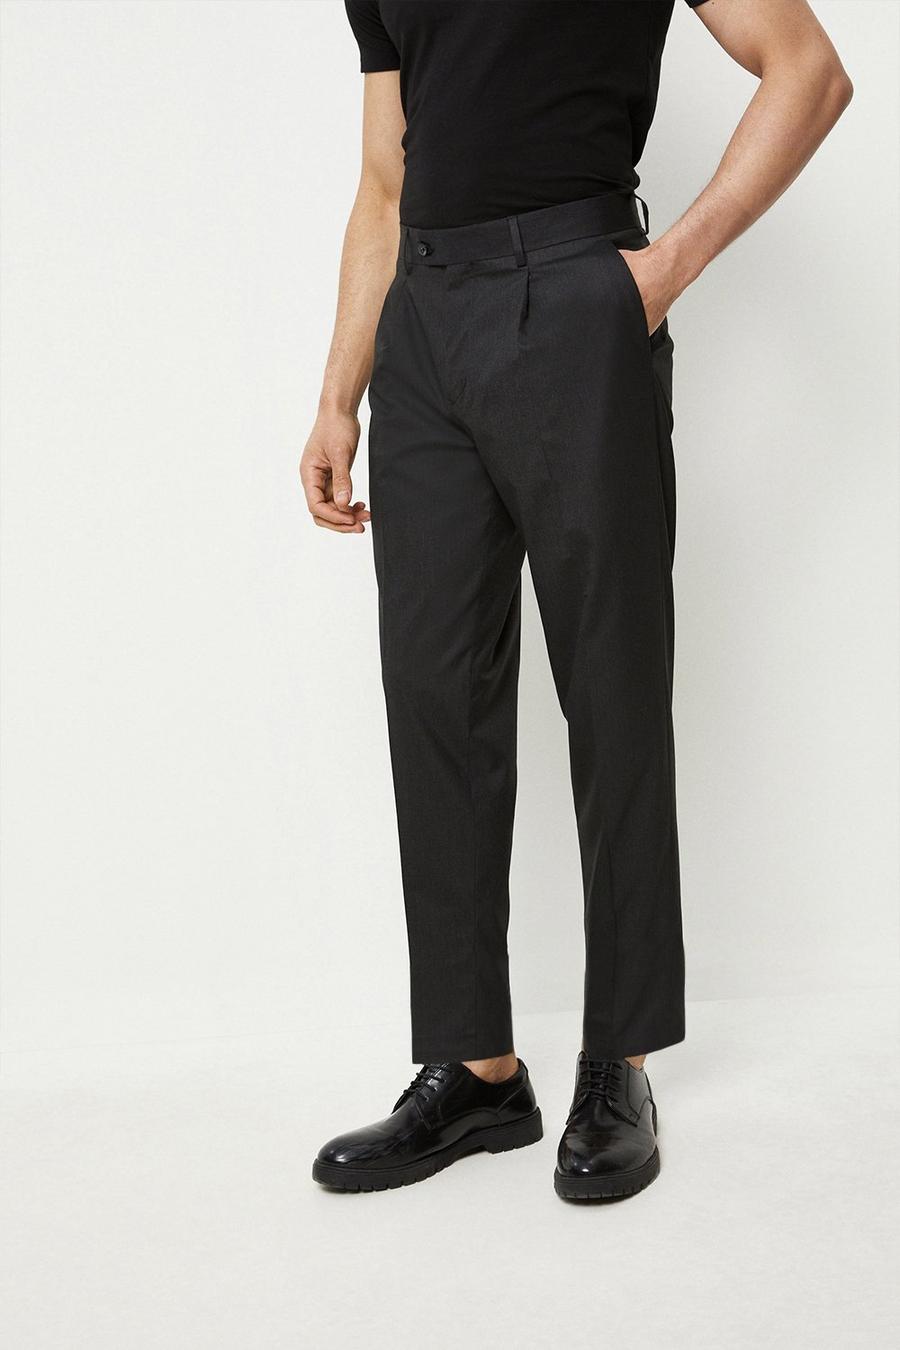 1904 Tapered Fit Charcoal Suit Trouser